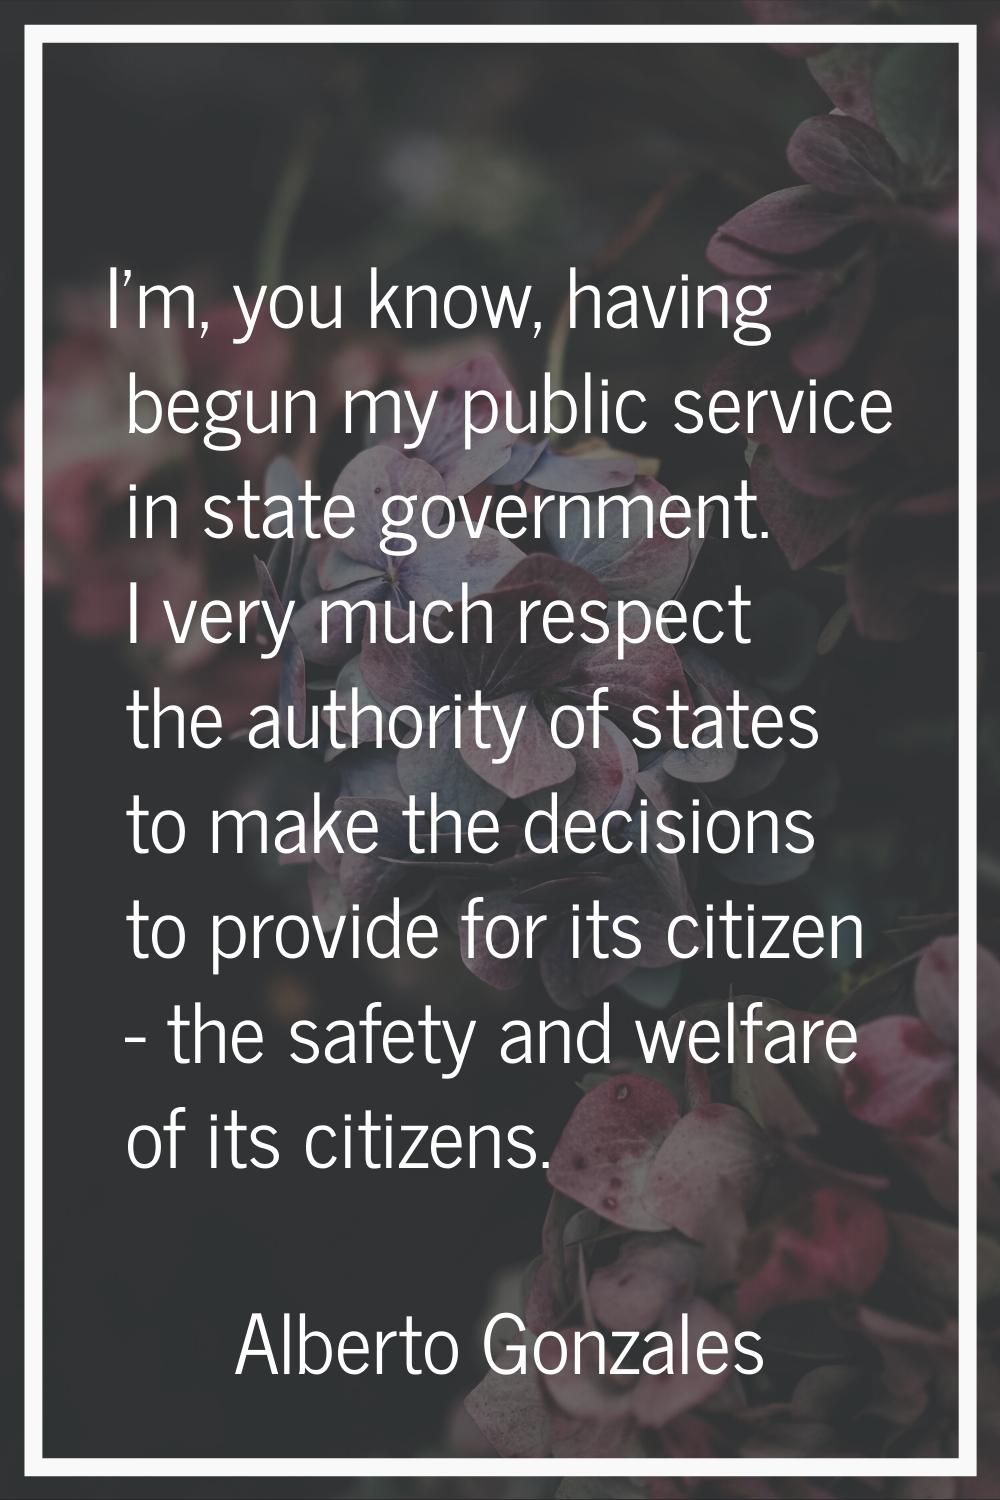 I'm, you know, having begun my public service in state government. I very much respect the authorit